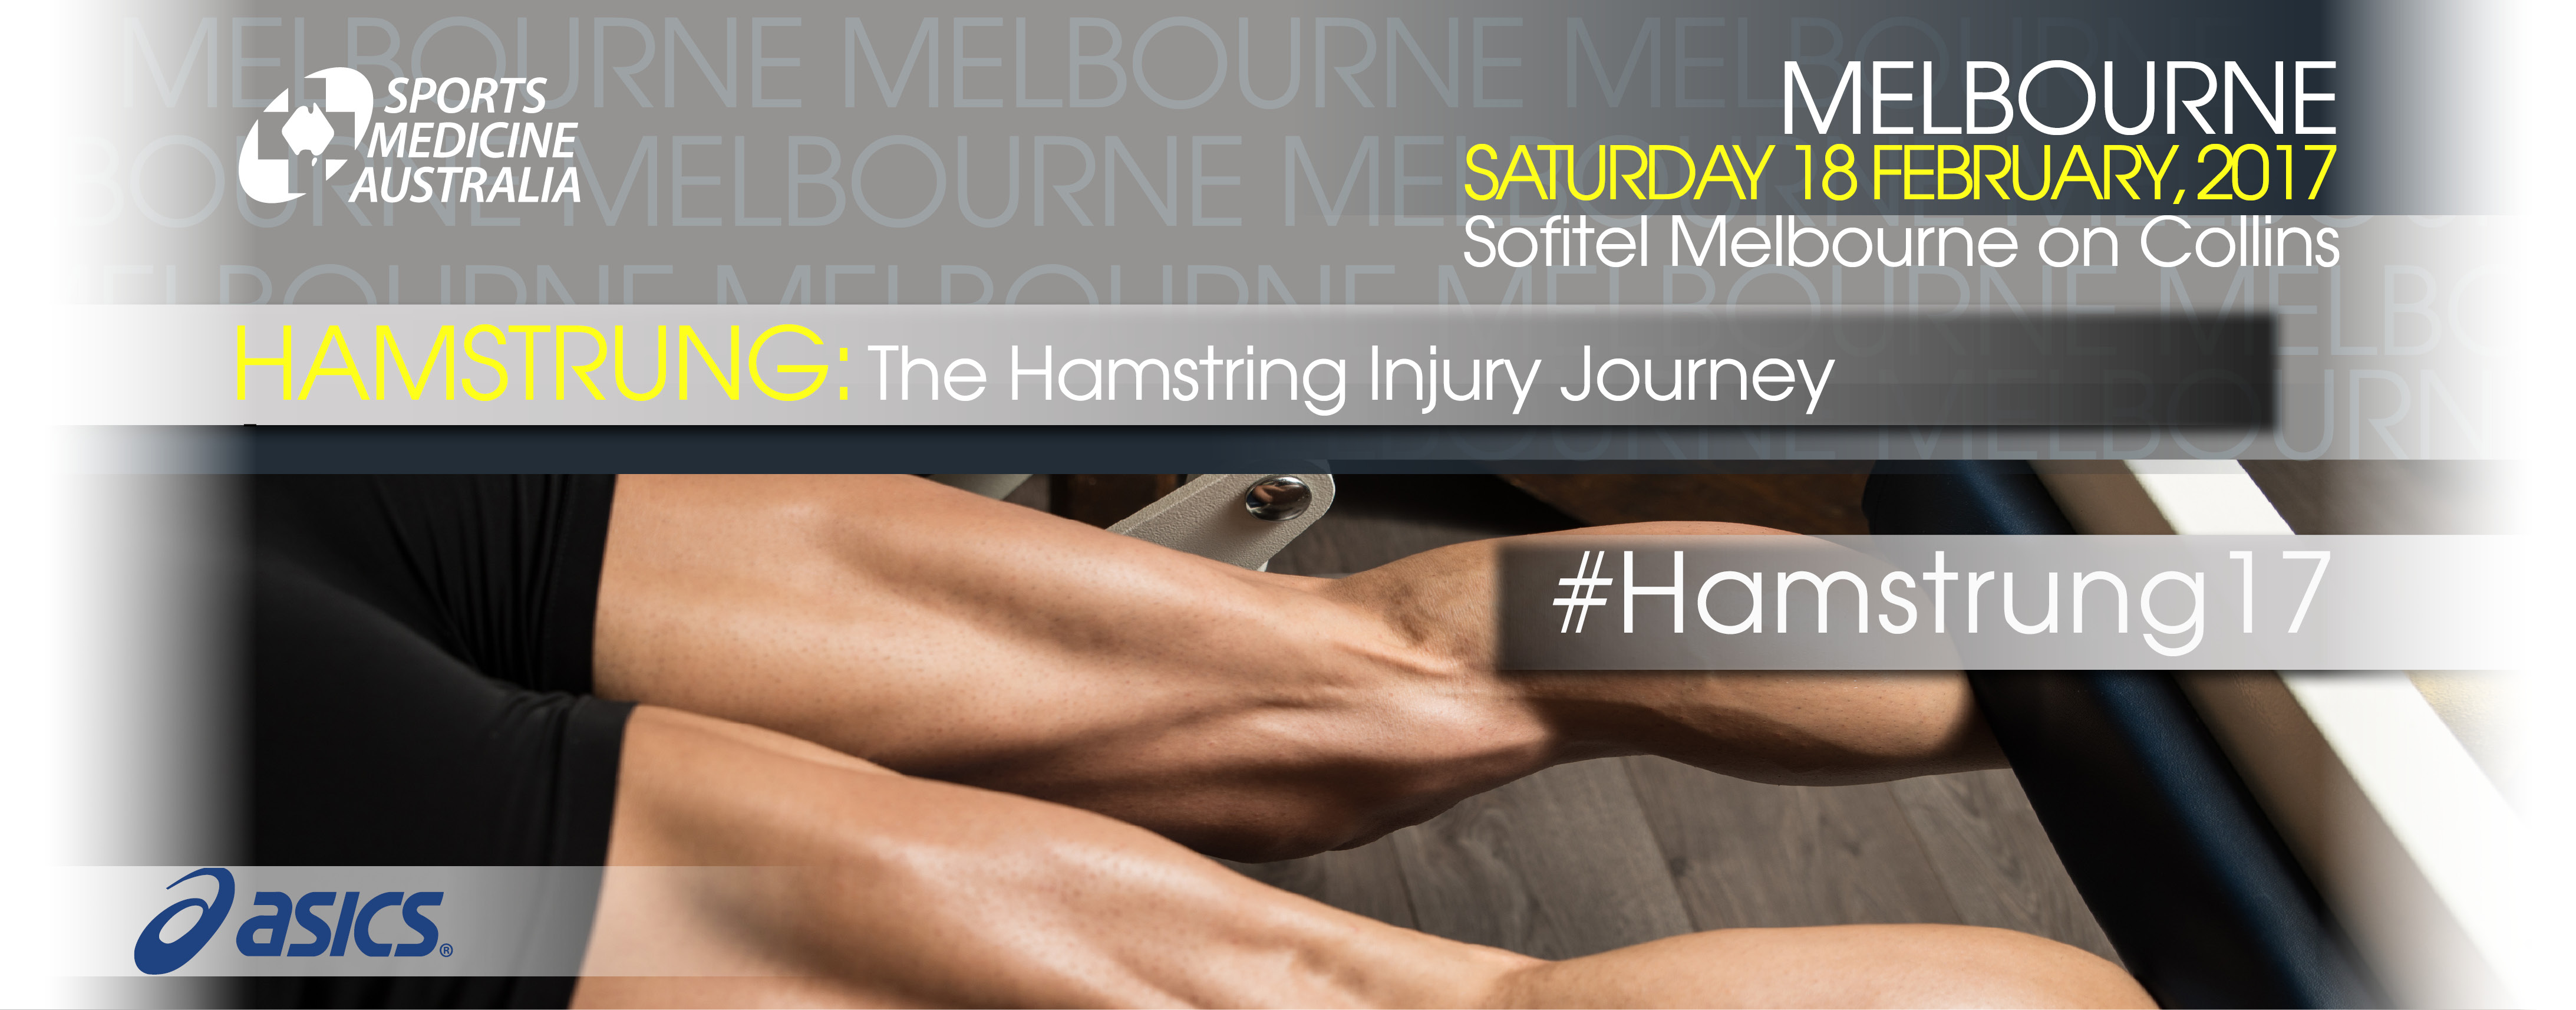 What are some tips for rehabilitating a hamstring injury?